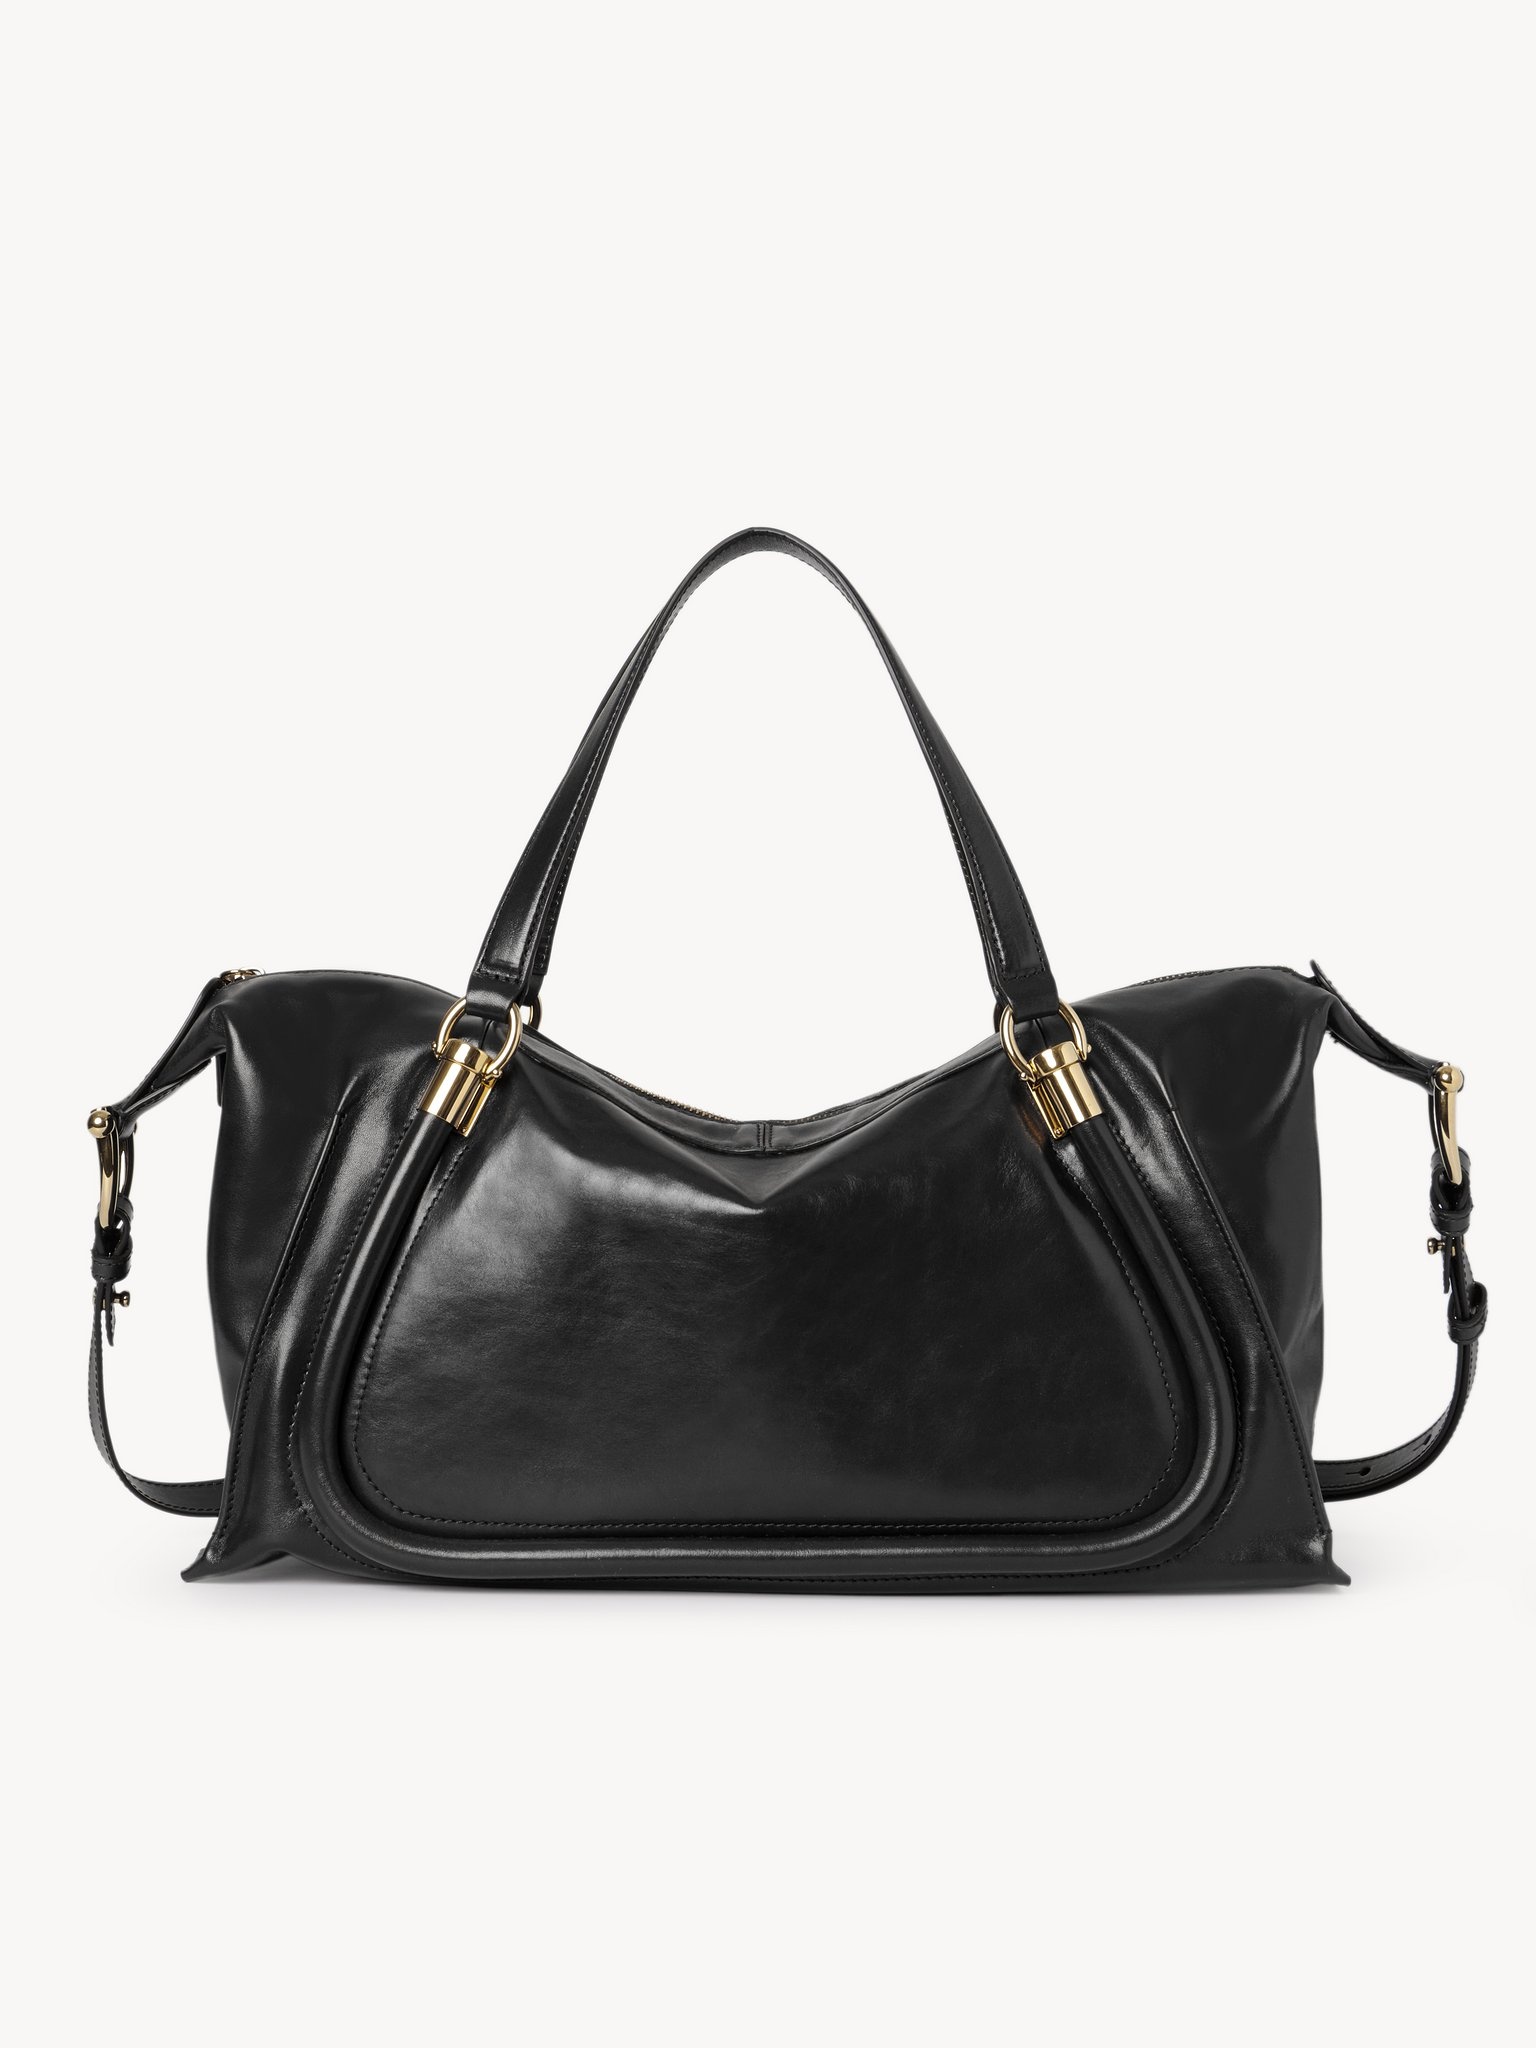 PARATY 24 BAG IN SOFT LEATHER - 3